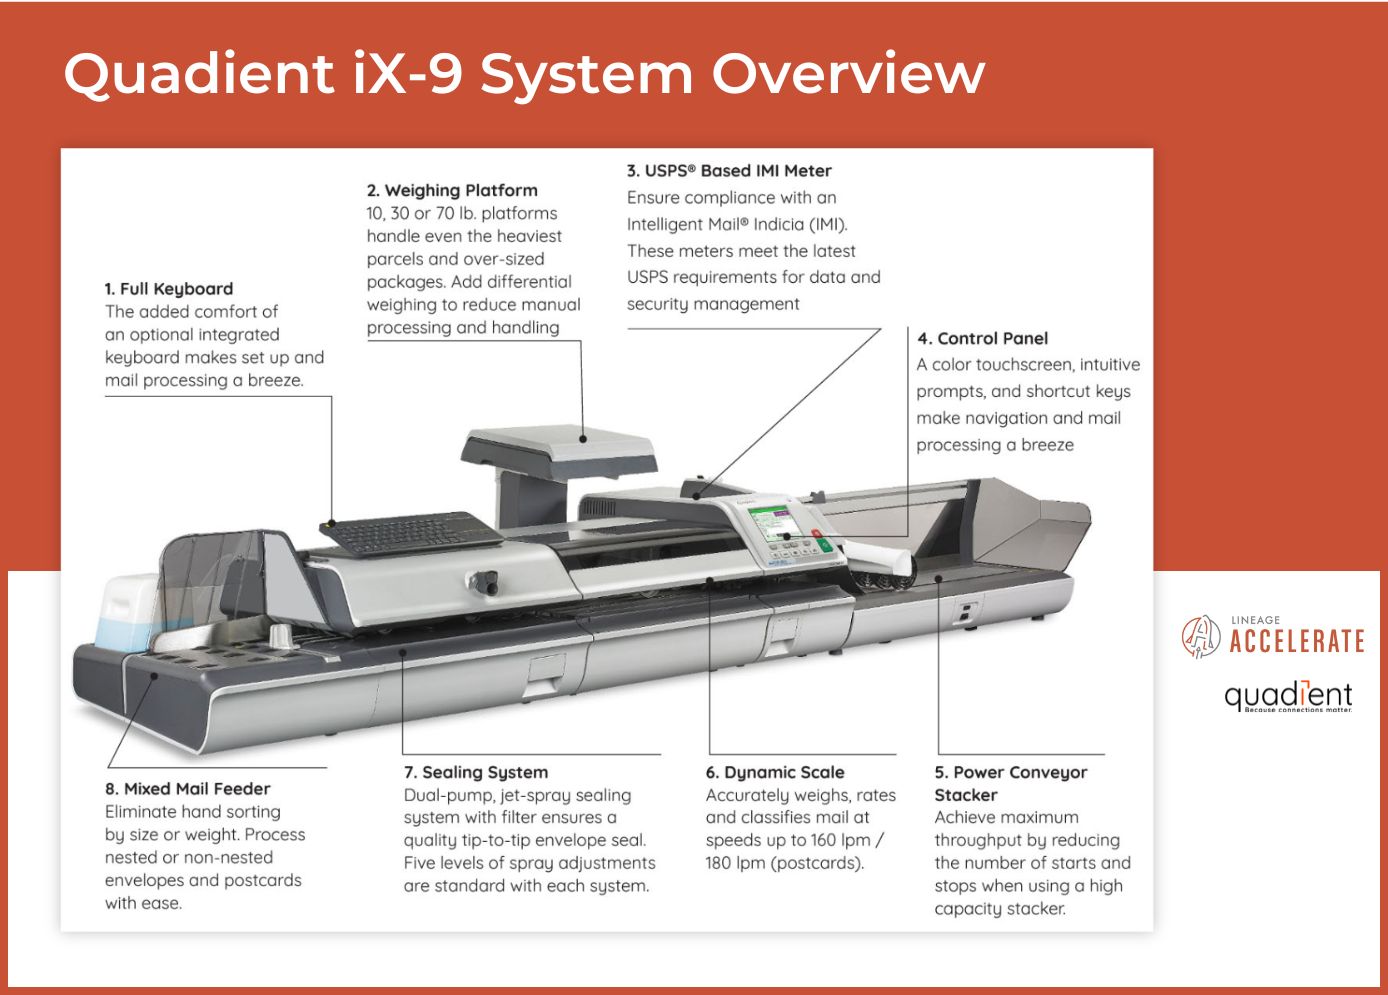 Quadient iX-9 System Overview, offered by Lineage Accelerate